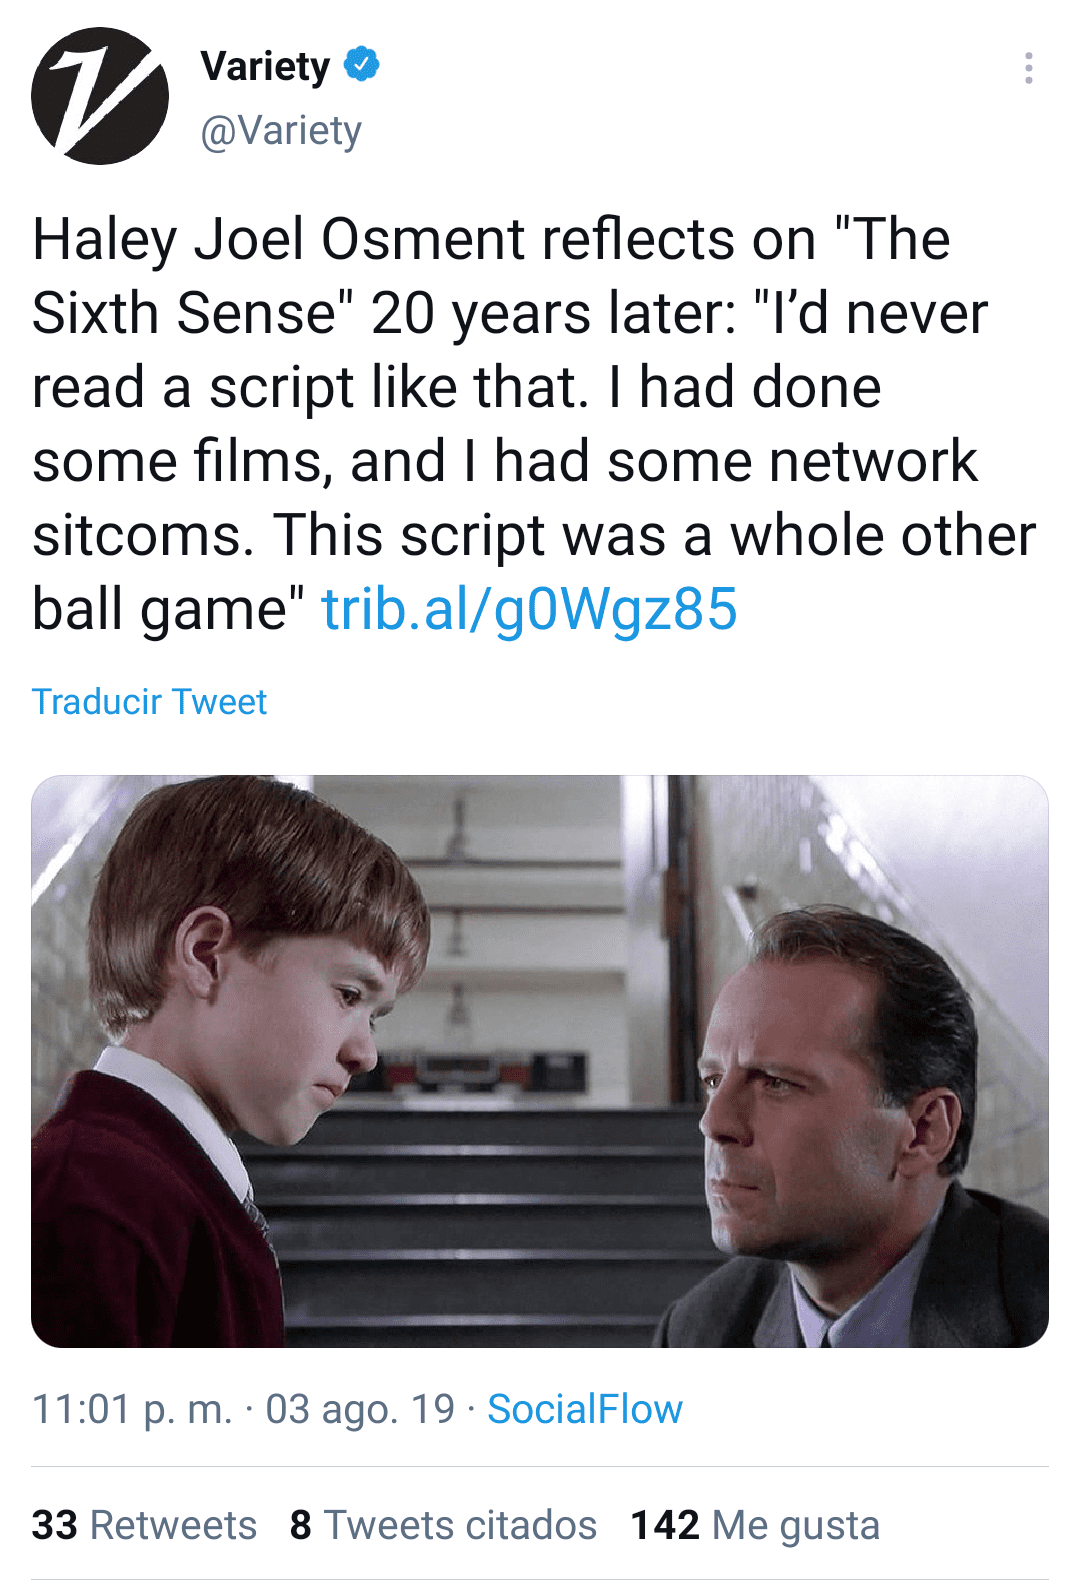 Haley Joel Osment and Bruce Willis on "The Sixth Sense" | Photo: Twitter/Variety